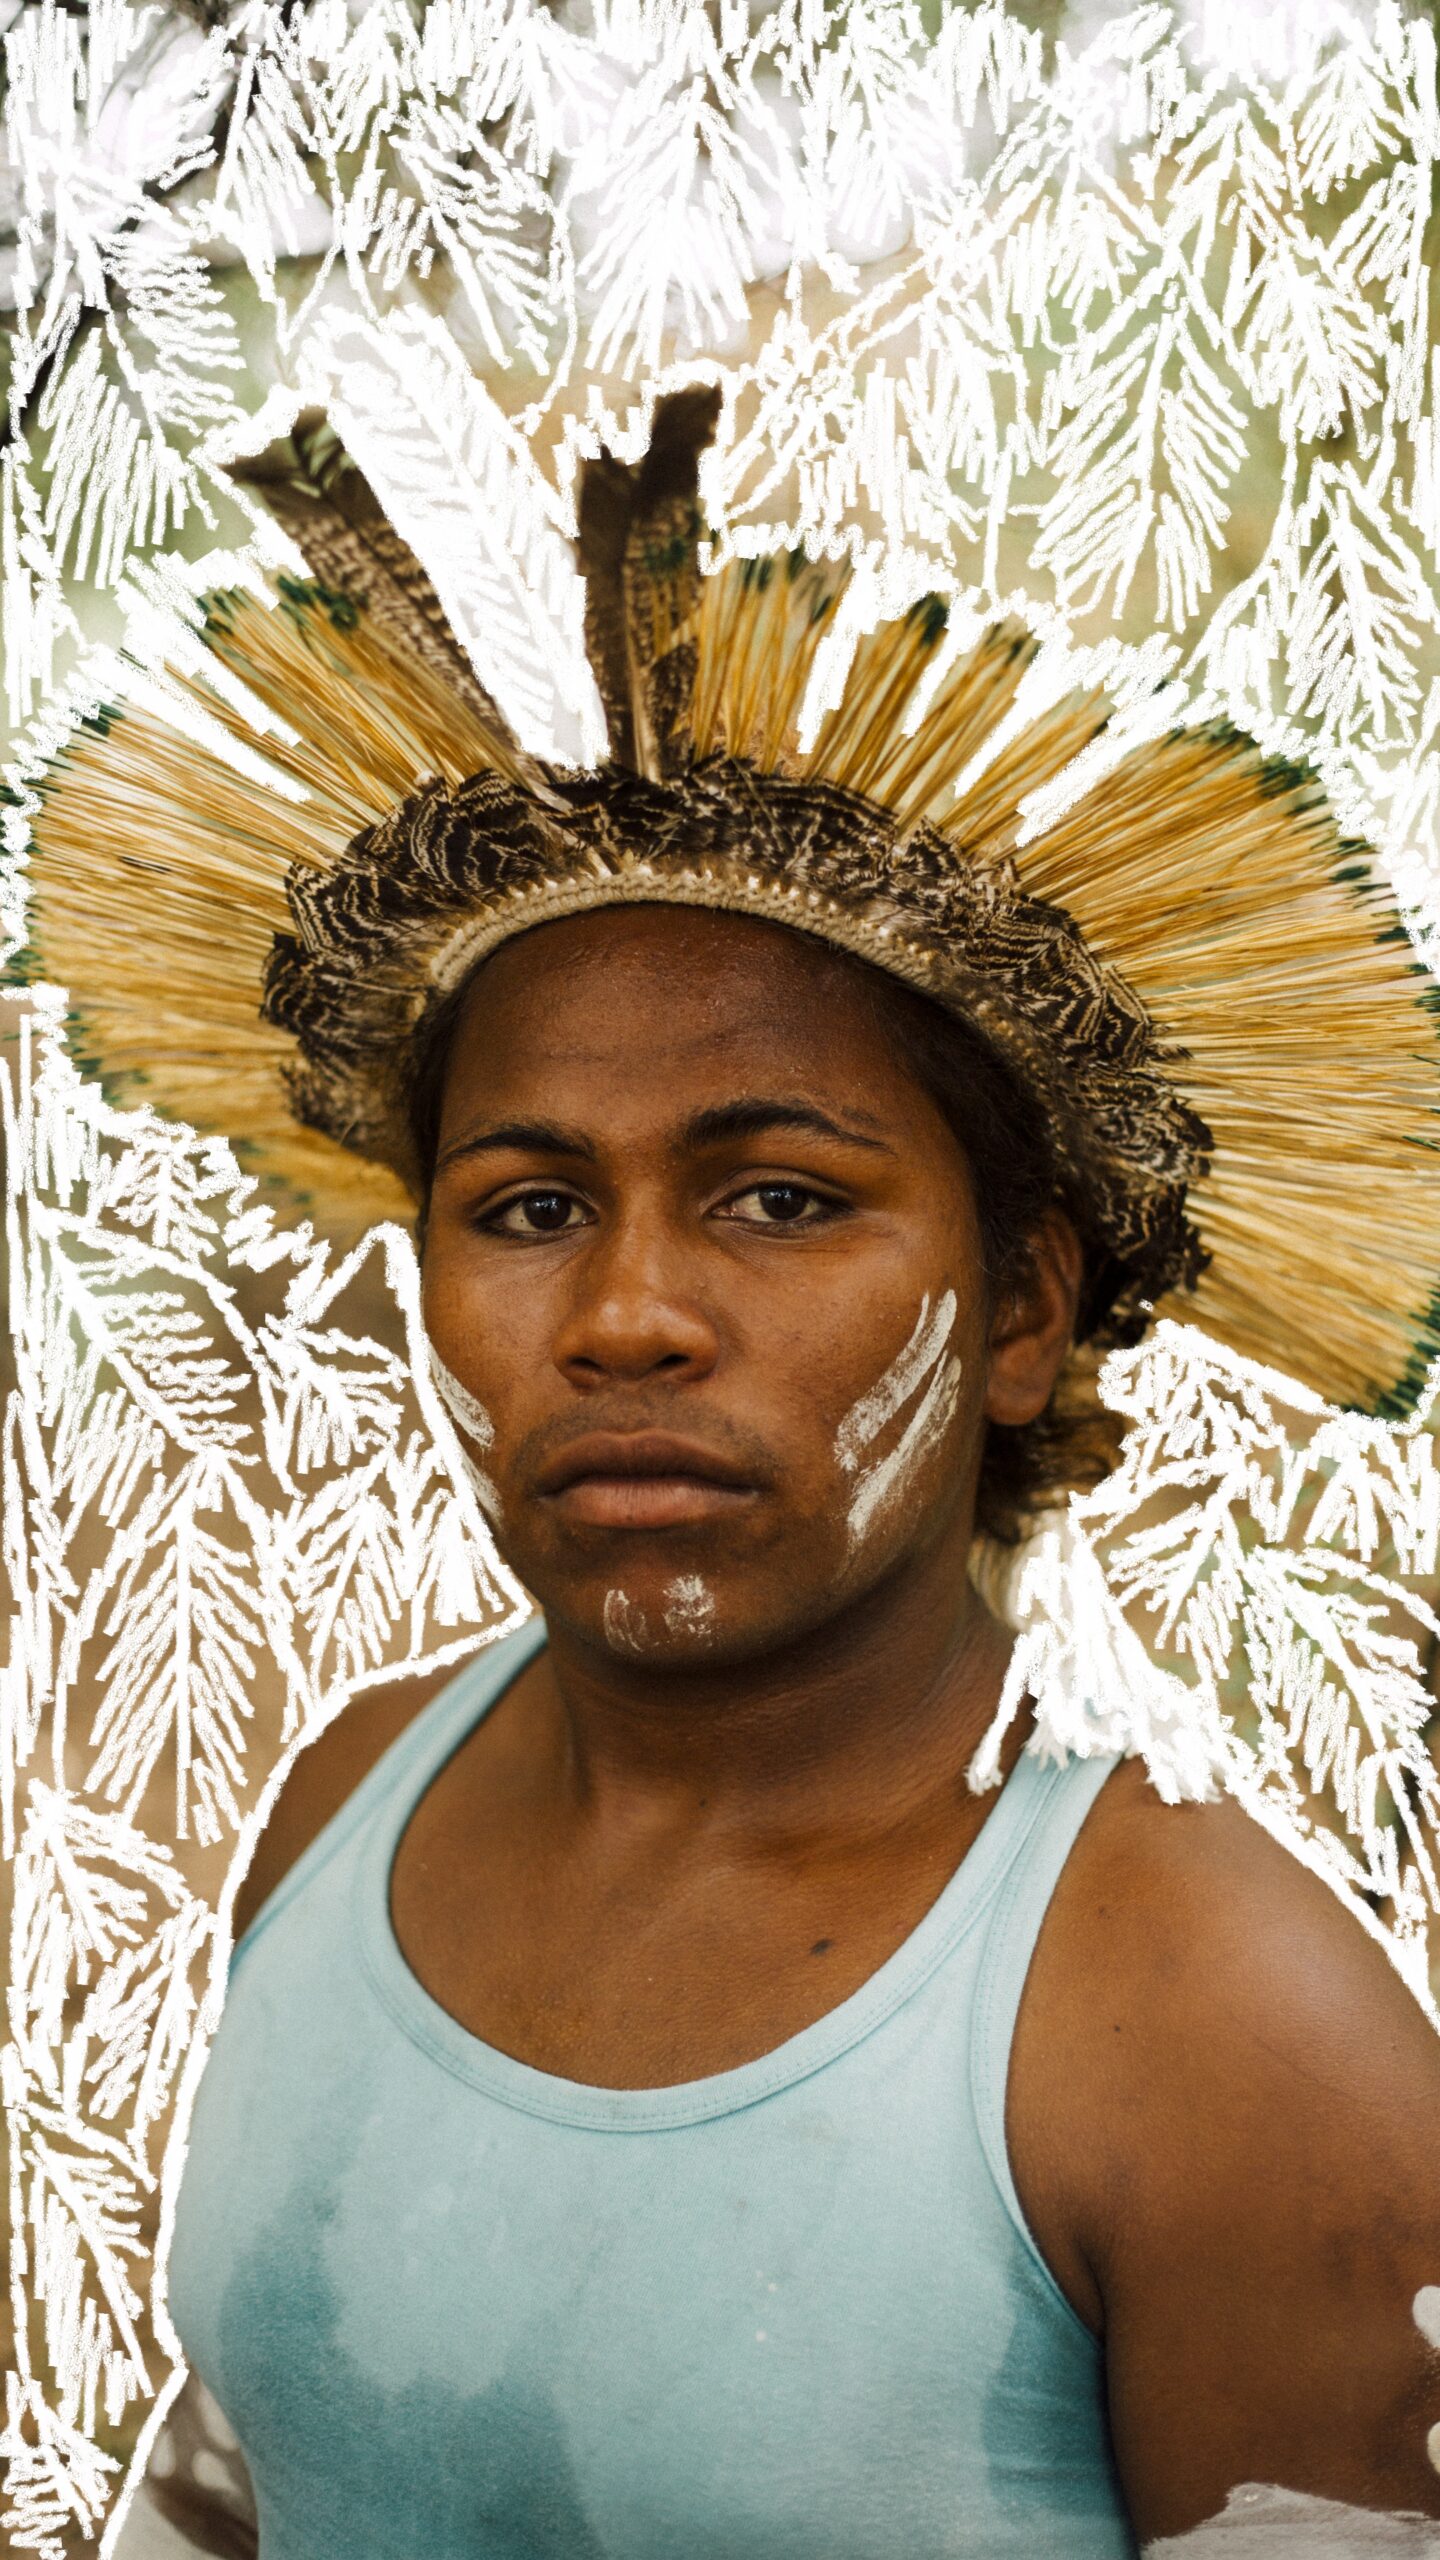 Portrait from the 'Origem' series, featuring illustrative background added through AR technology. A person wearing a blue vest with a headdress made of natural materials. They have two white stripes of paint across each cheek and on the chin. The background of the portrait is covered in white illustrated leaves which are digitally created.